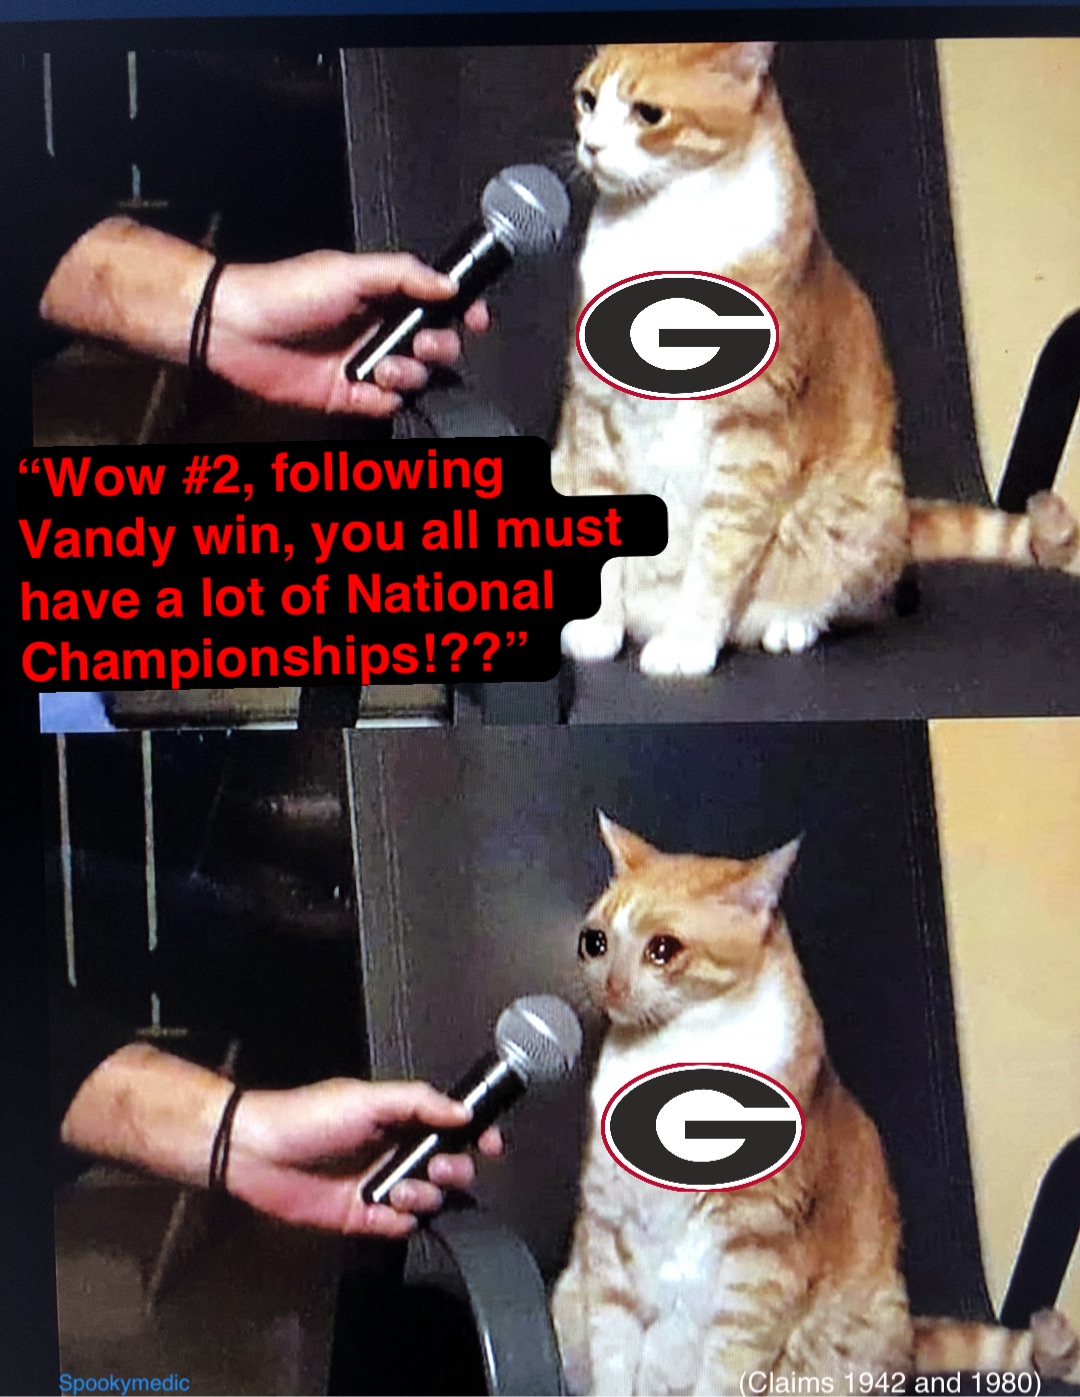 “Wow #2, following Vandy win, you all must have a lot of National Championships!??” (Claims 1942 and 1980)